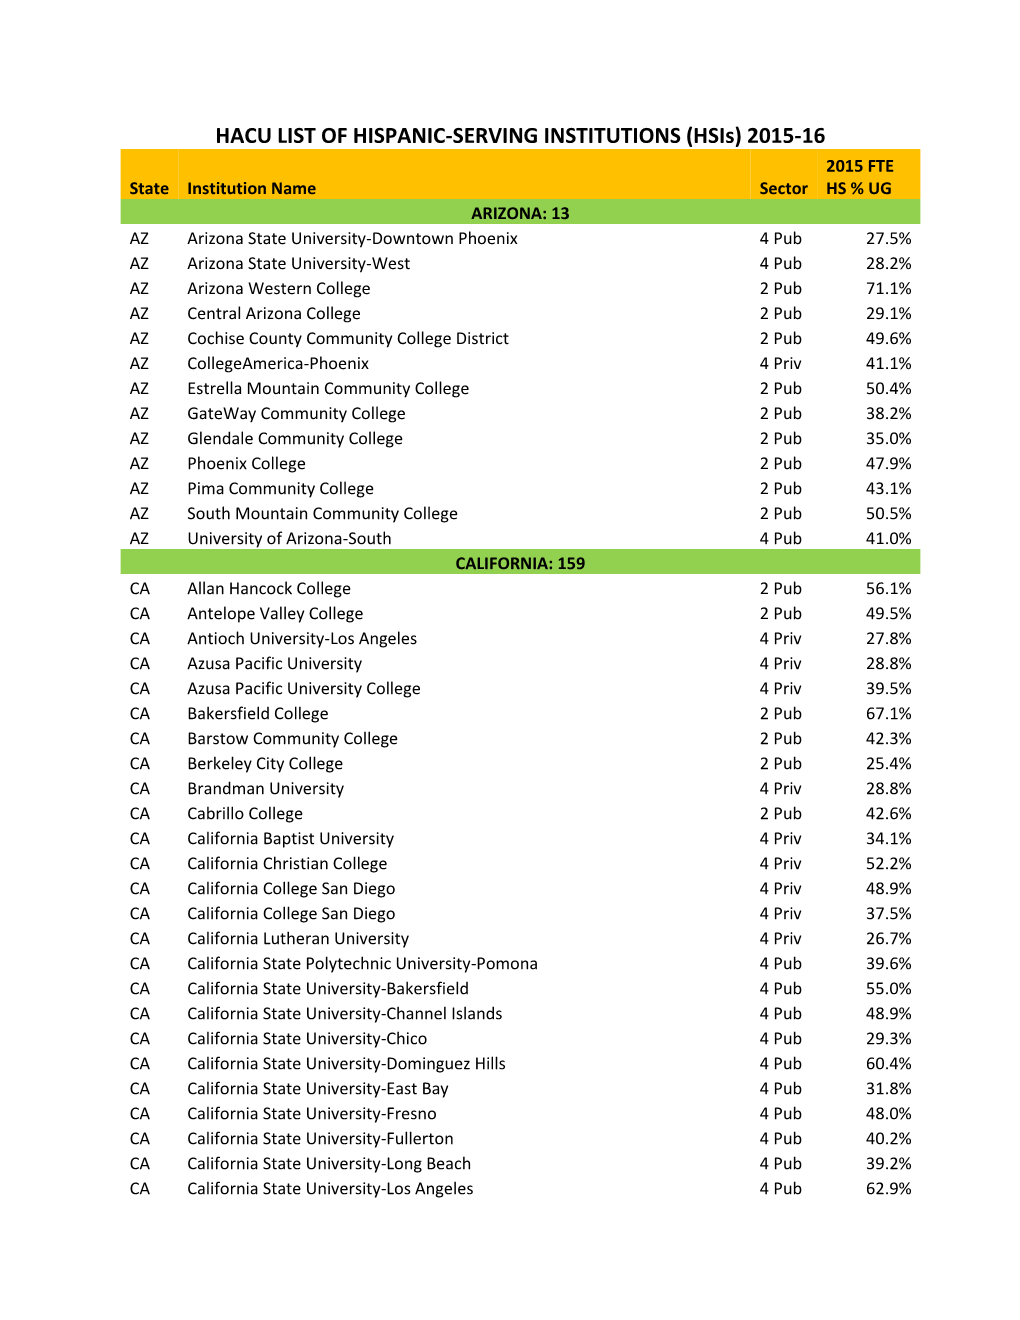 HACU LIST of HISPANIC-SERVING INSTITUTIONS (Hsis) 2015-16